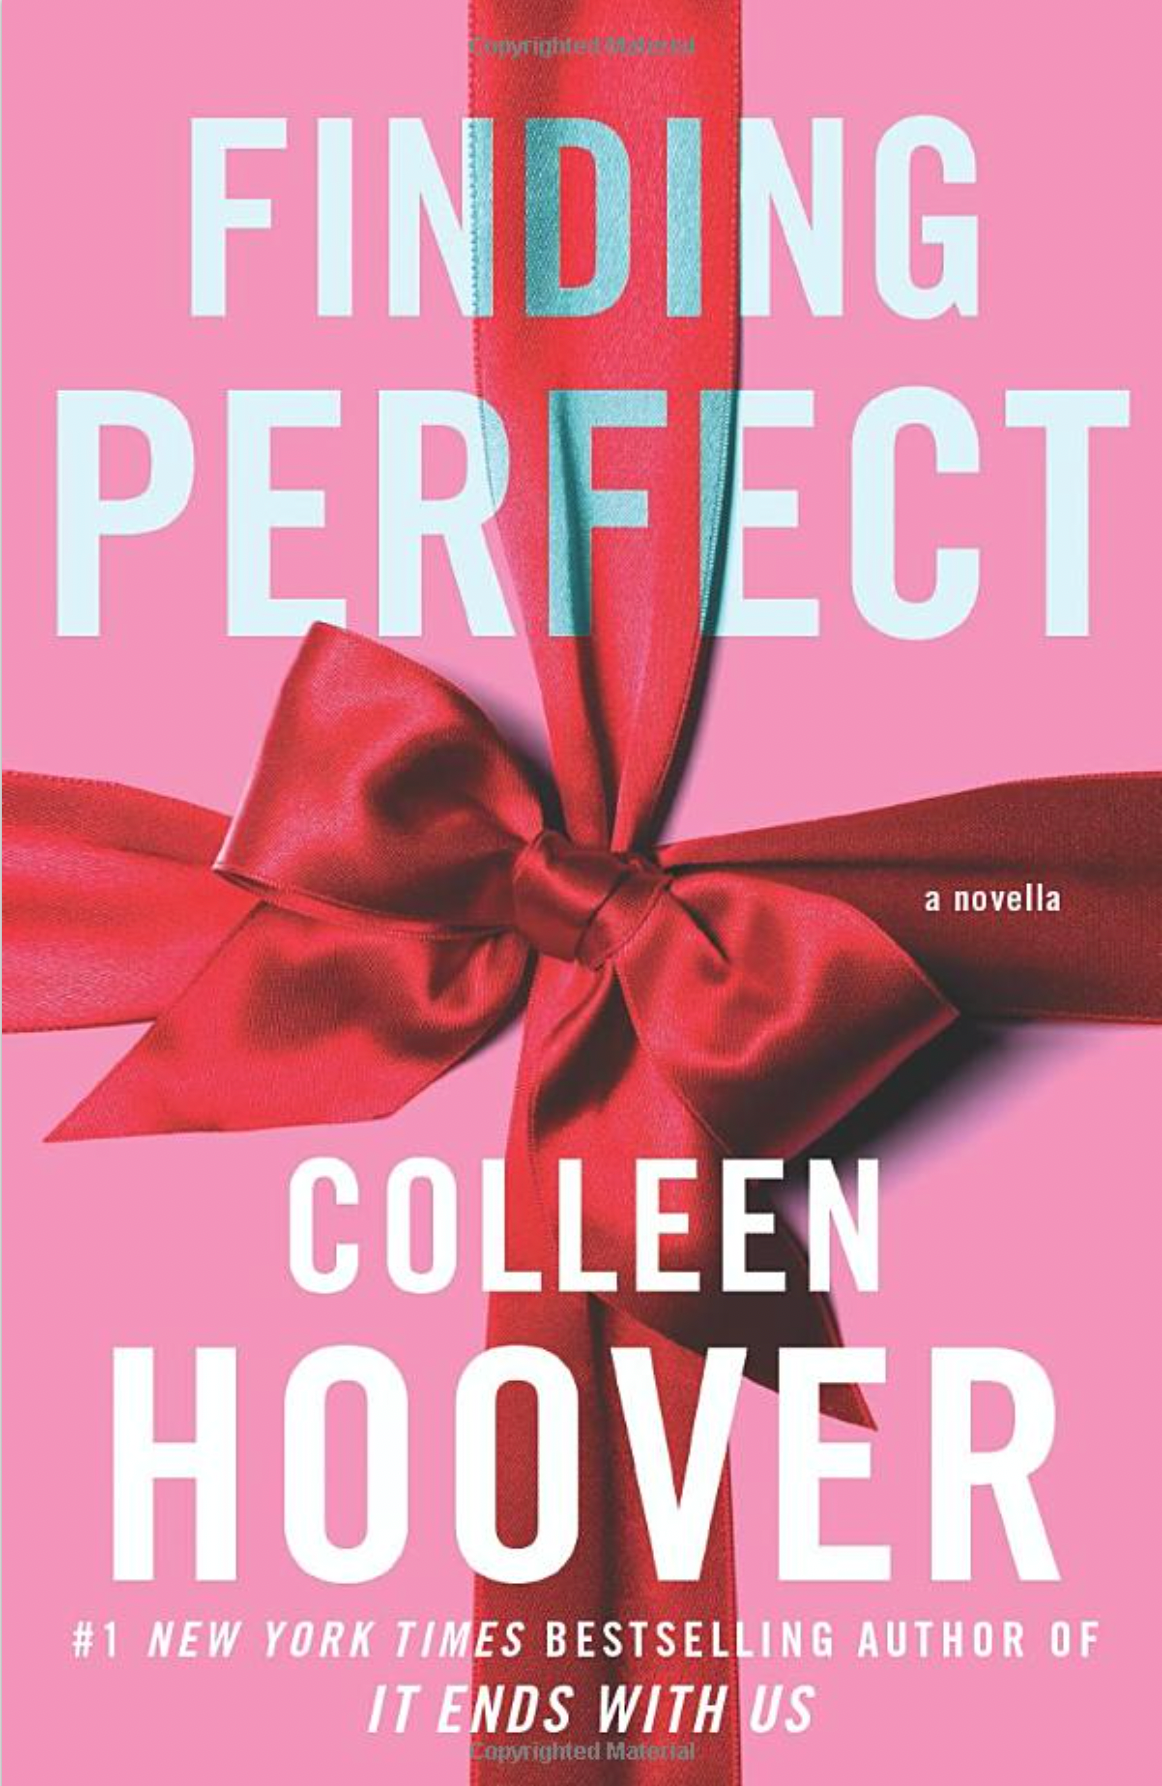 Colleen Hoover - Frequently Asked Questions (FAQs)